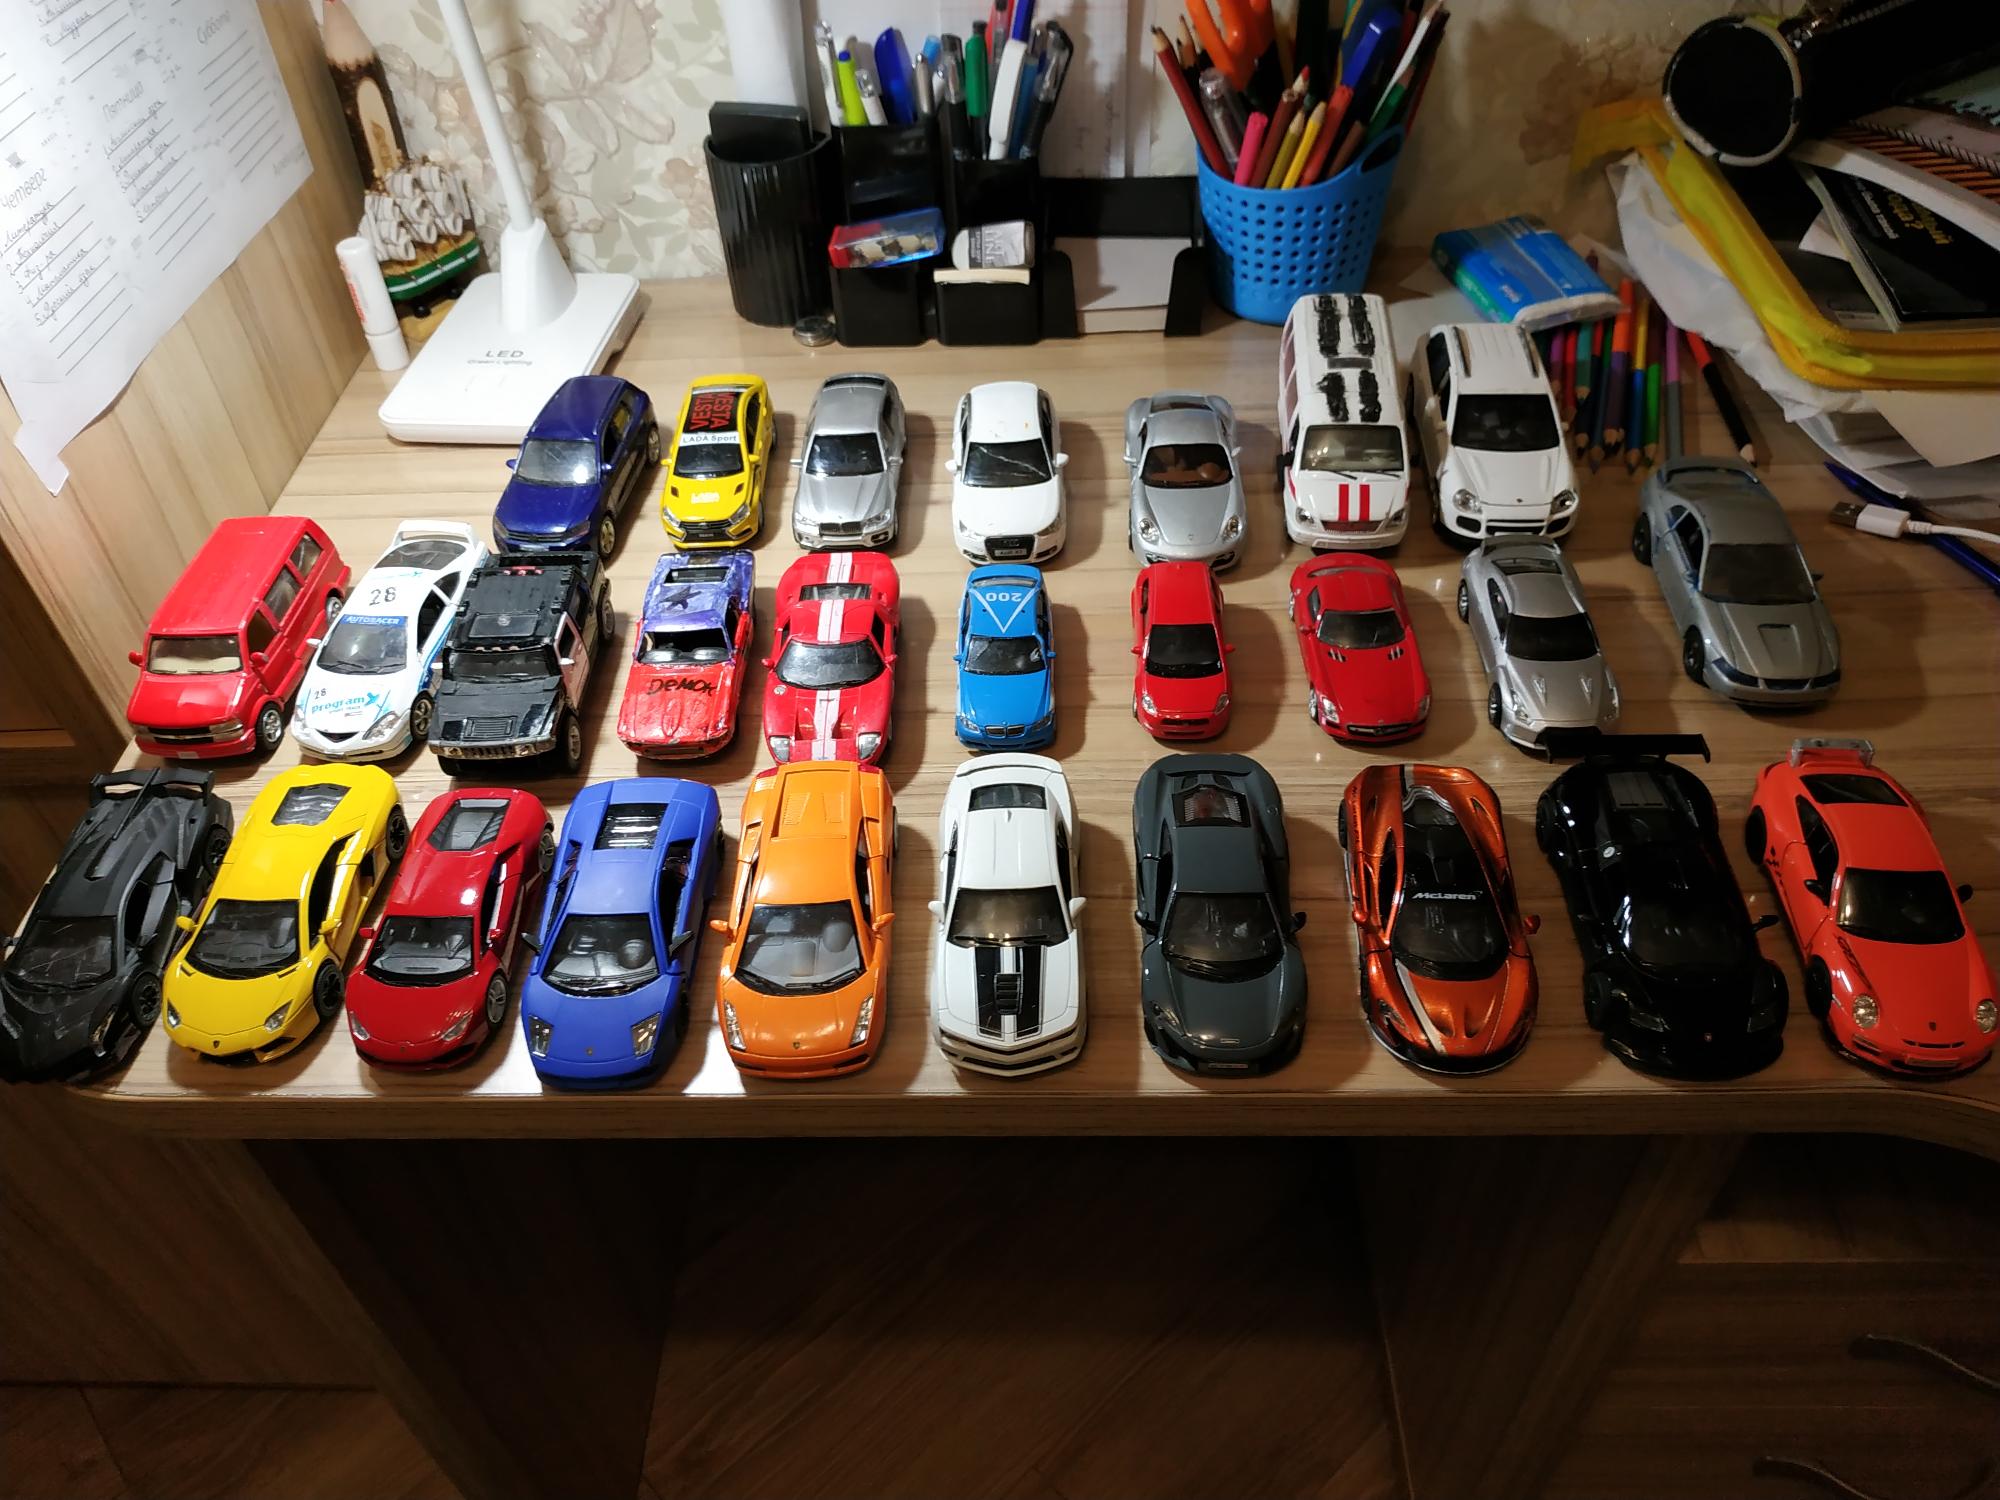 small car collection toys